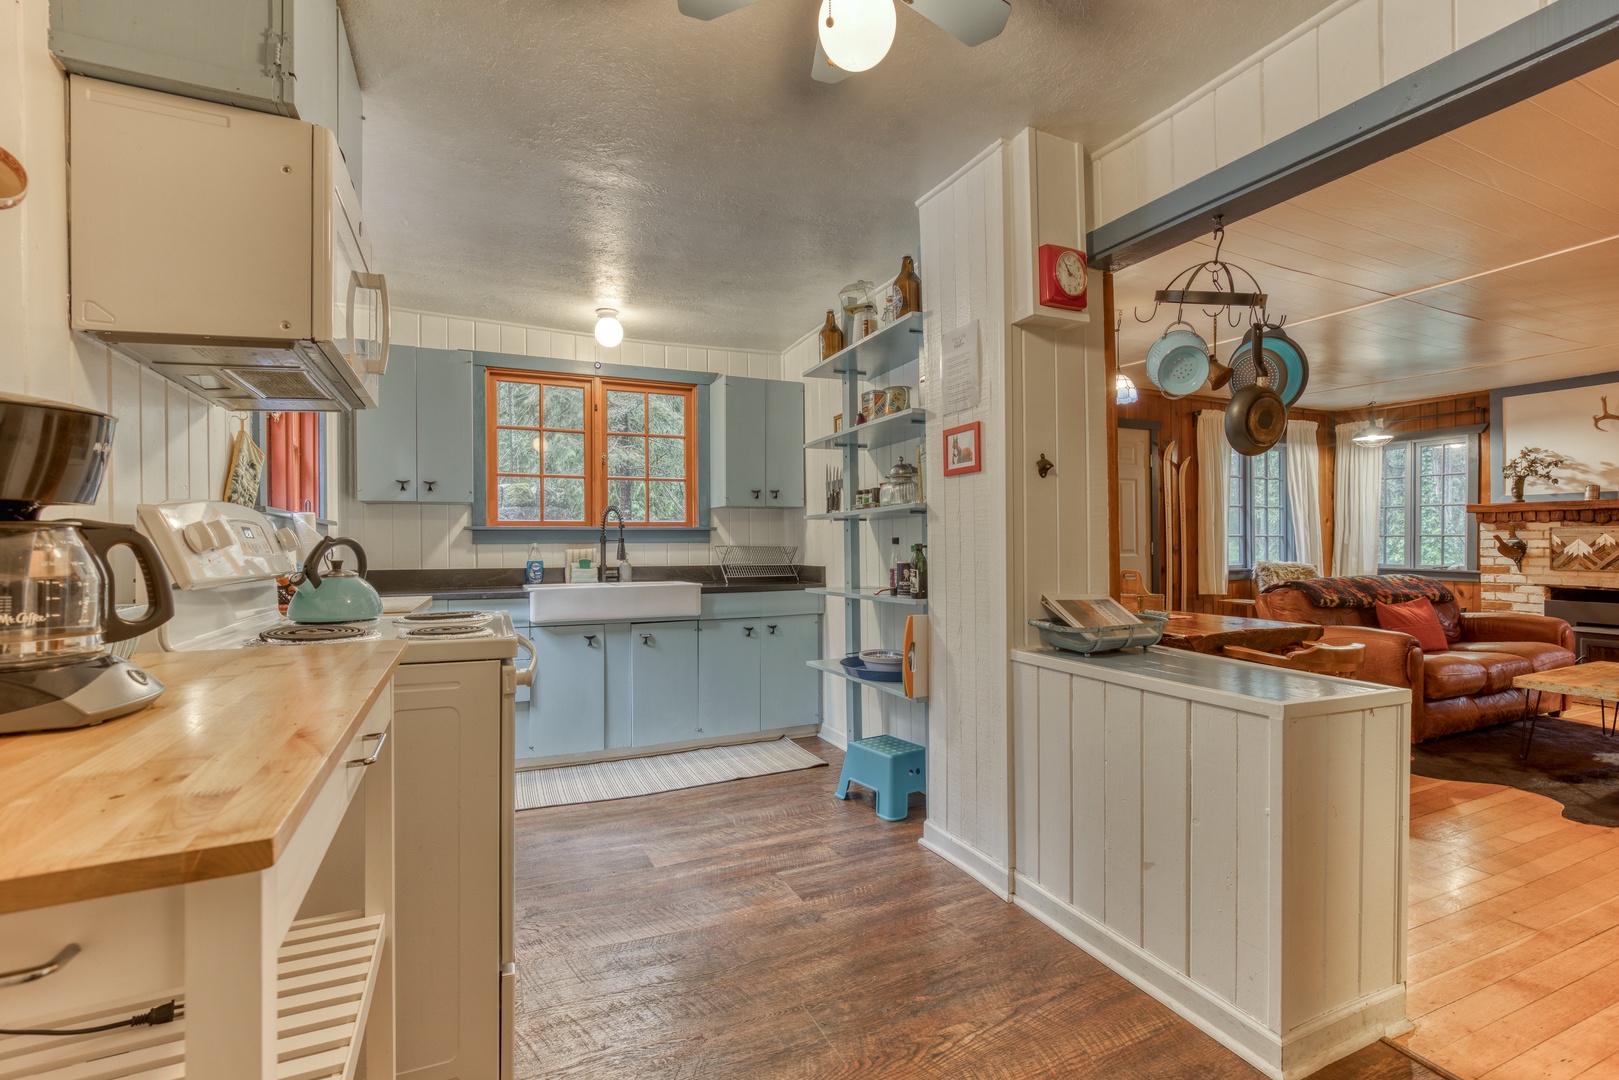 Brightwood Vacation Rentals, Springbrook Cabin - The retro kitchen is fully equipped with all the culinary tools needed to cook up some delicious food, including a fully stocked pantry and an eclectic old-school popcorn maker